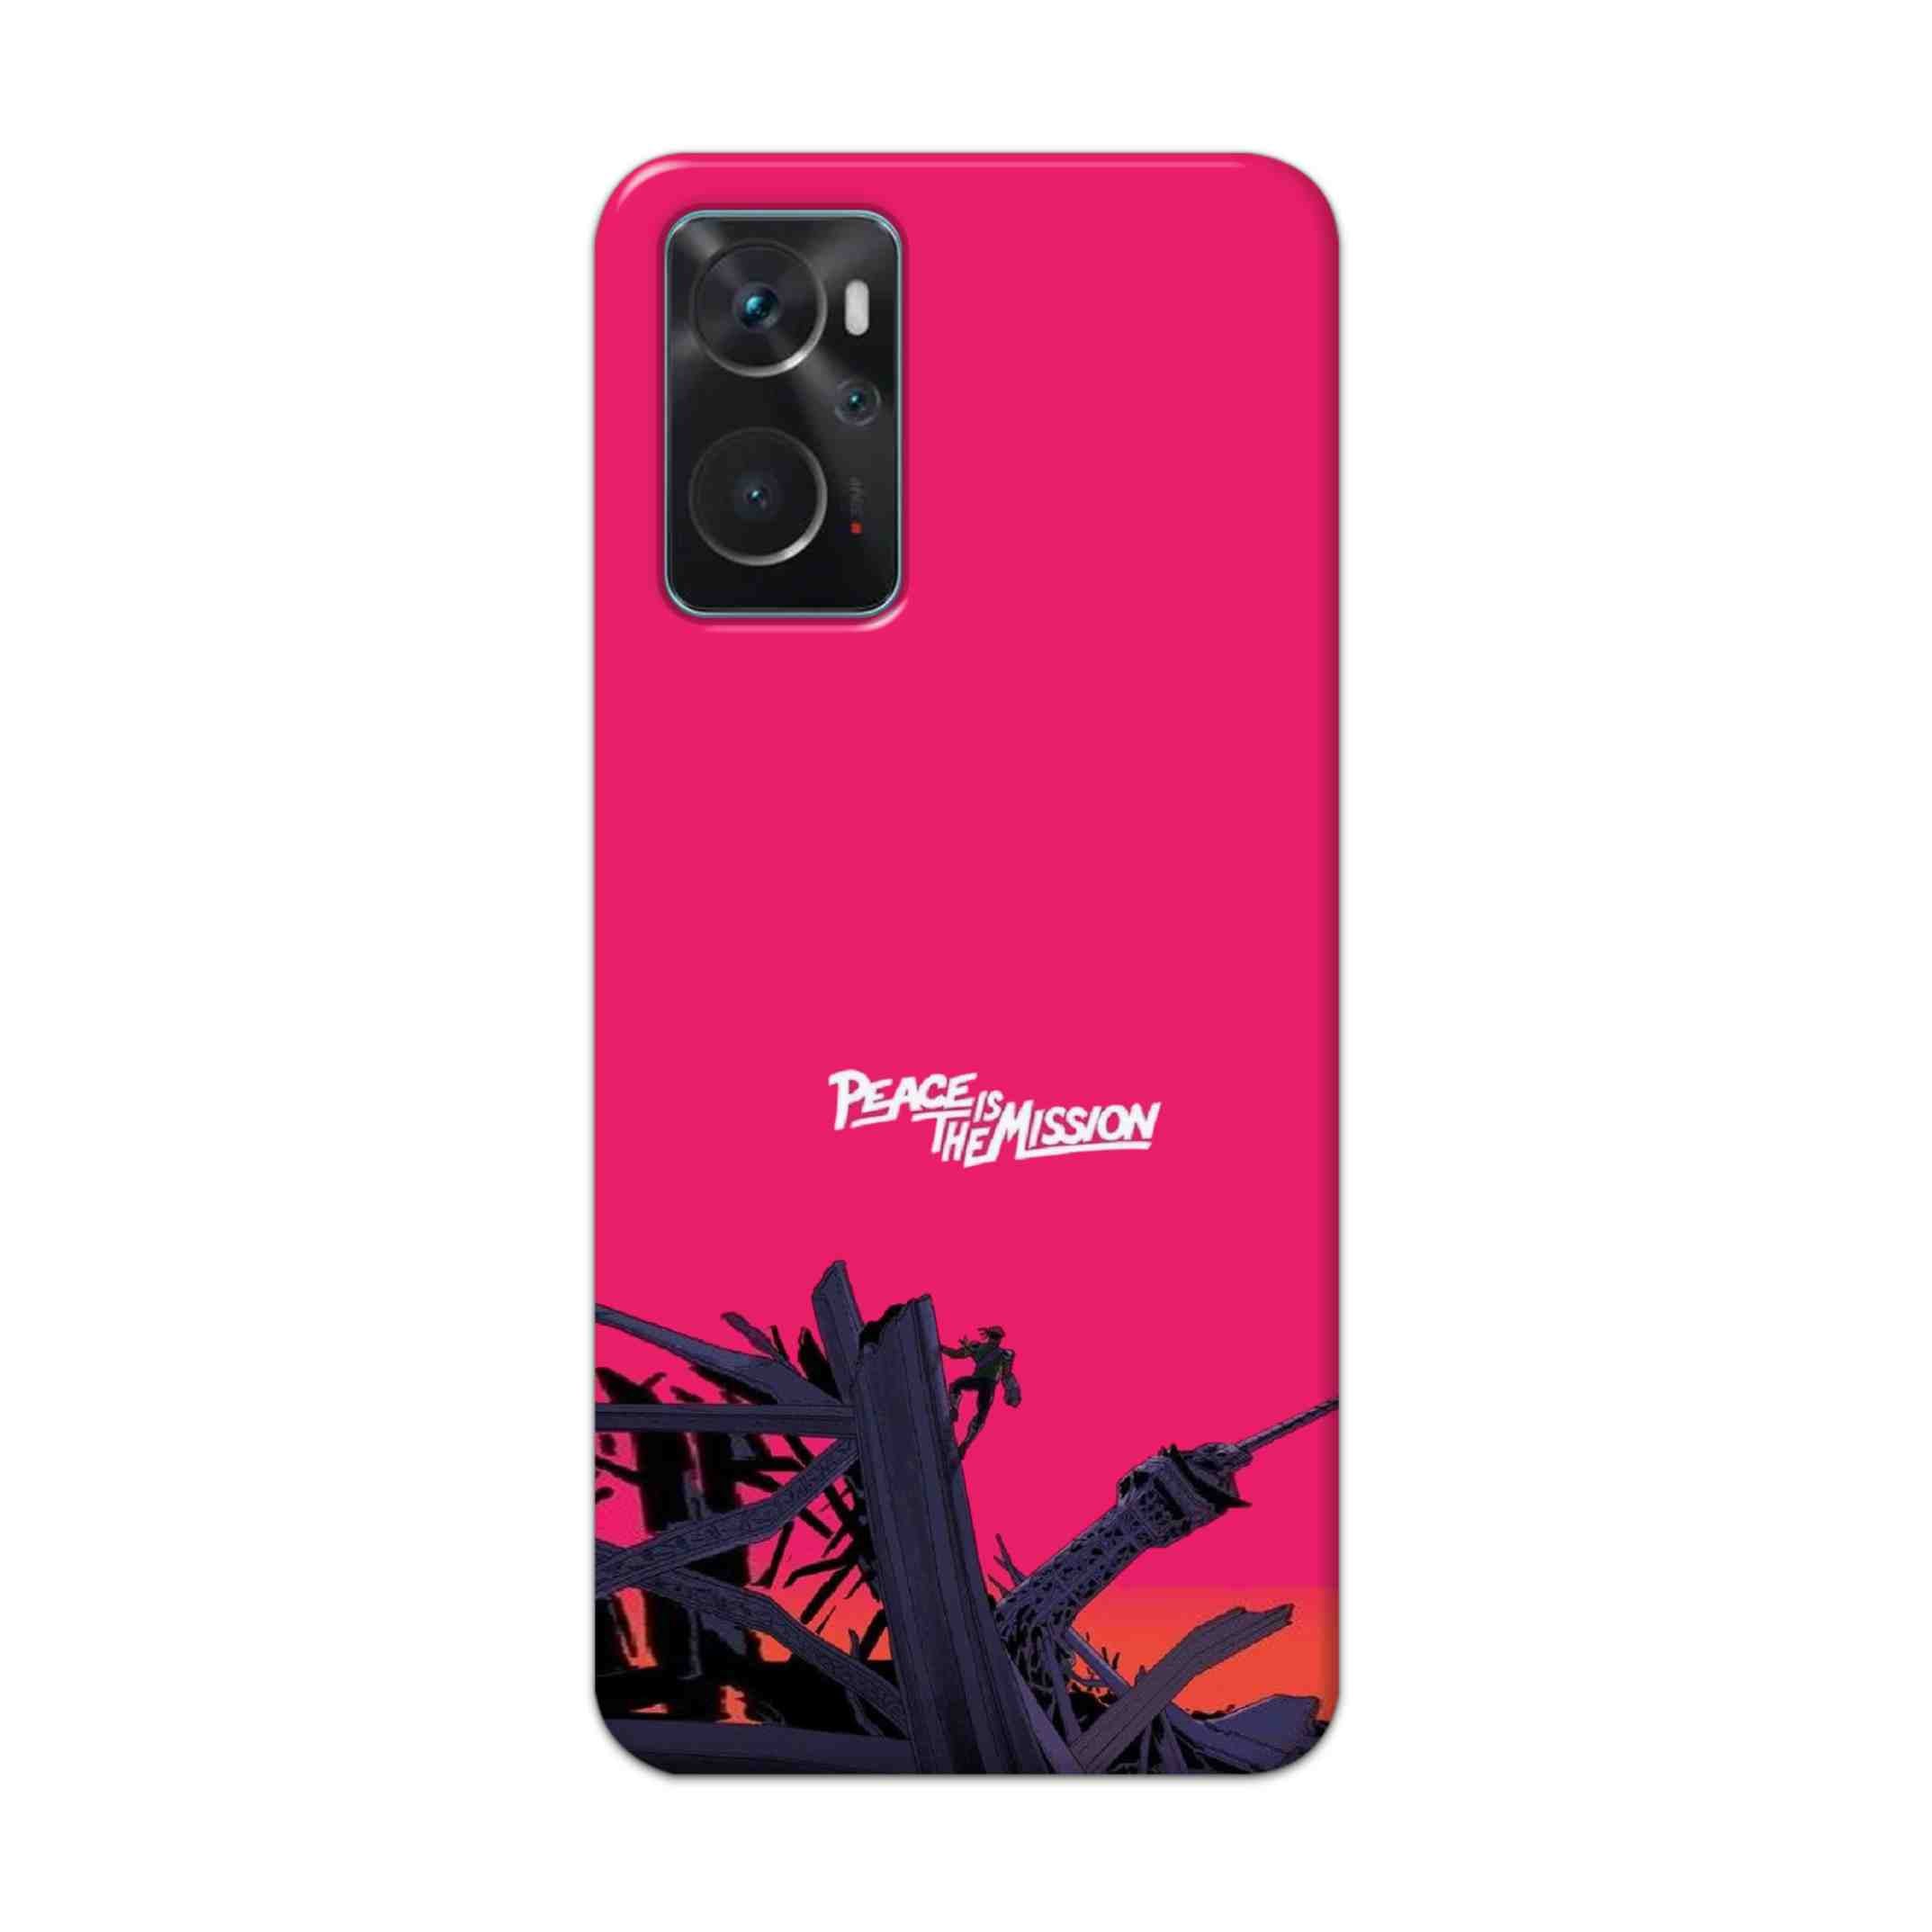 Buy Peace Is The Mission Hard Back Mobile Phone Case Cover For Oppo K10 Online